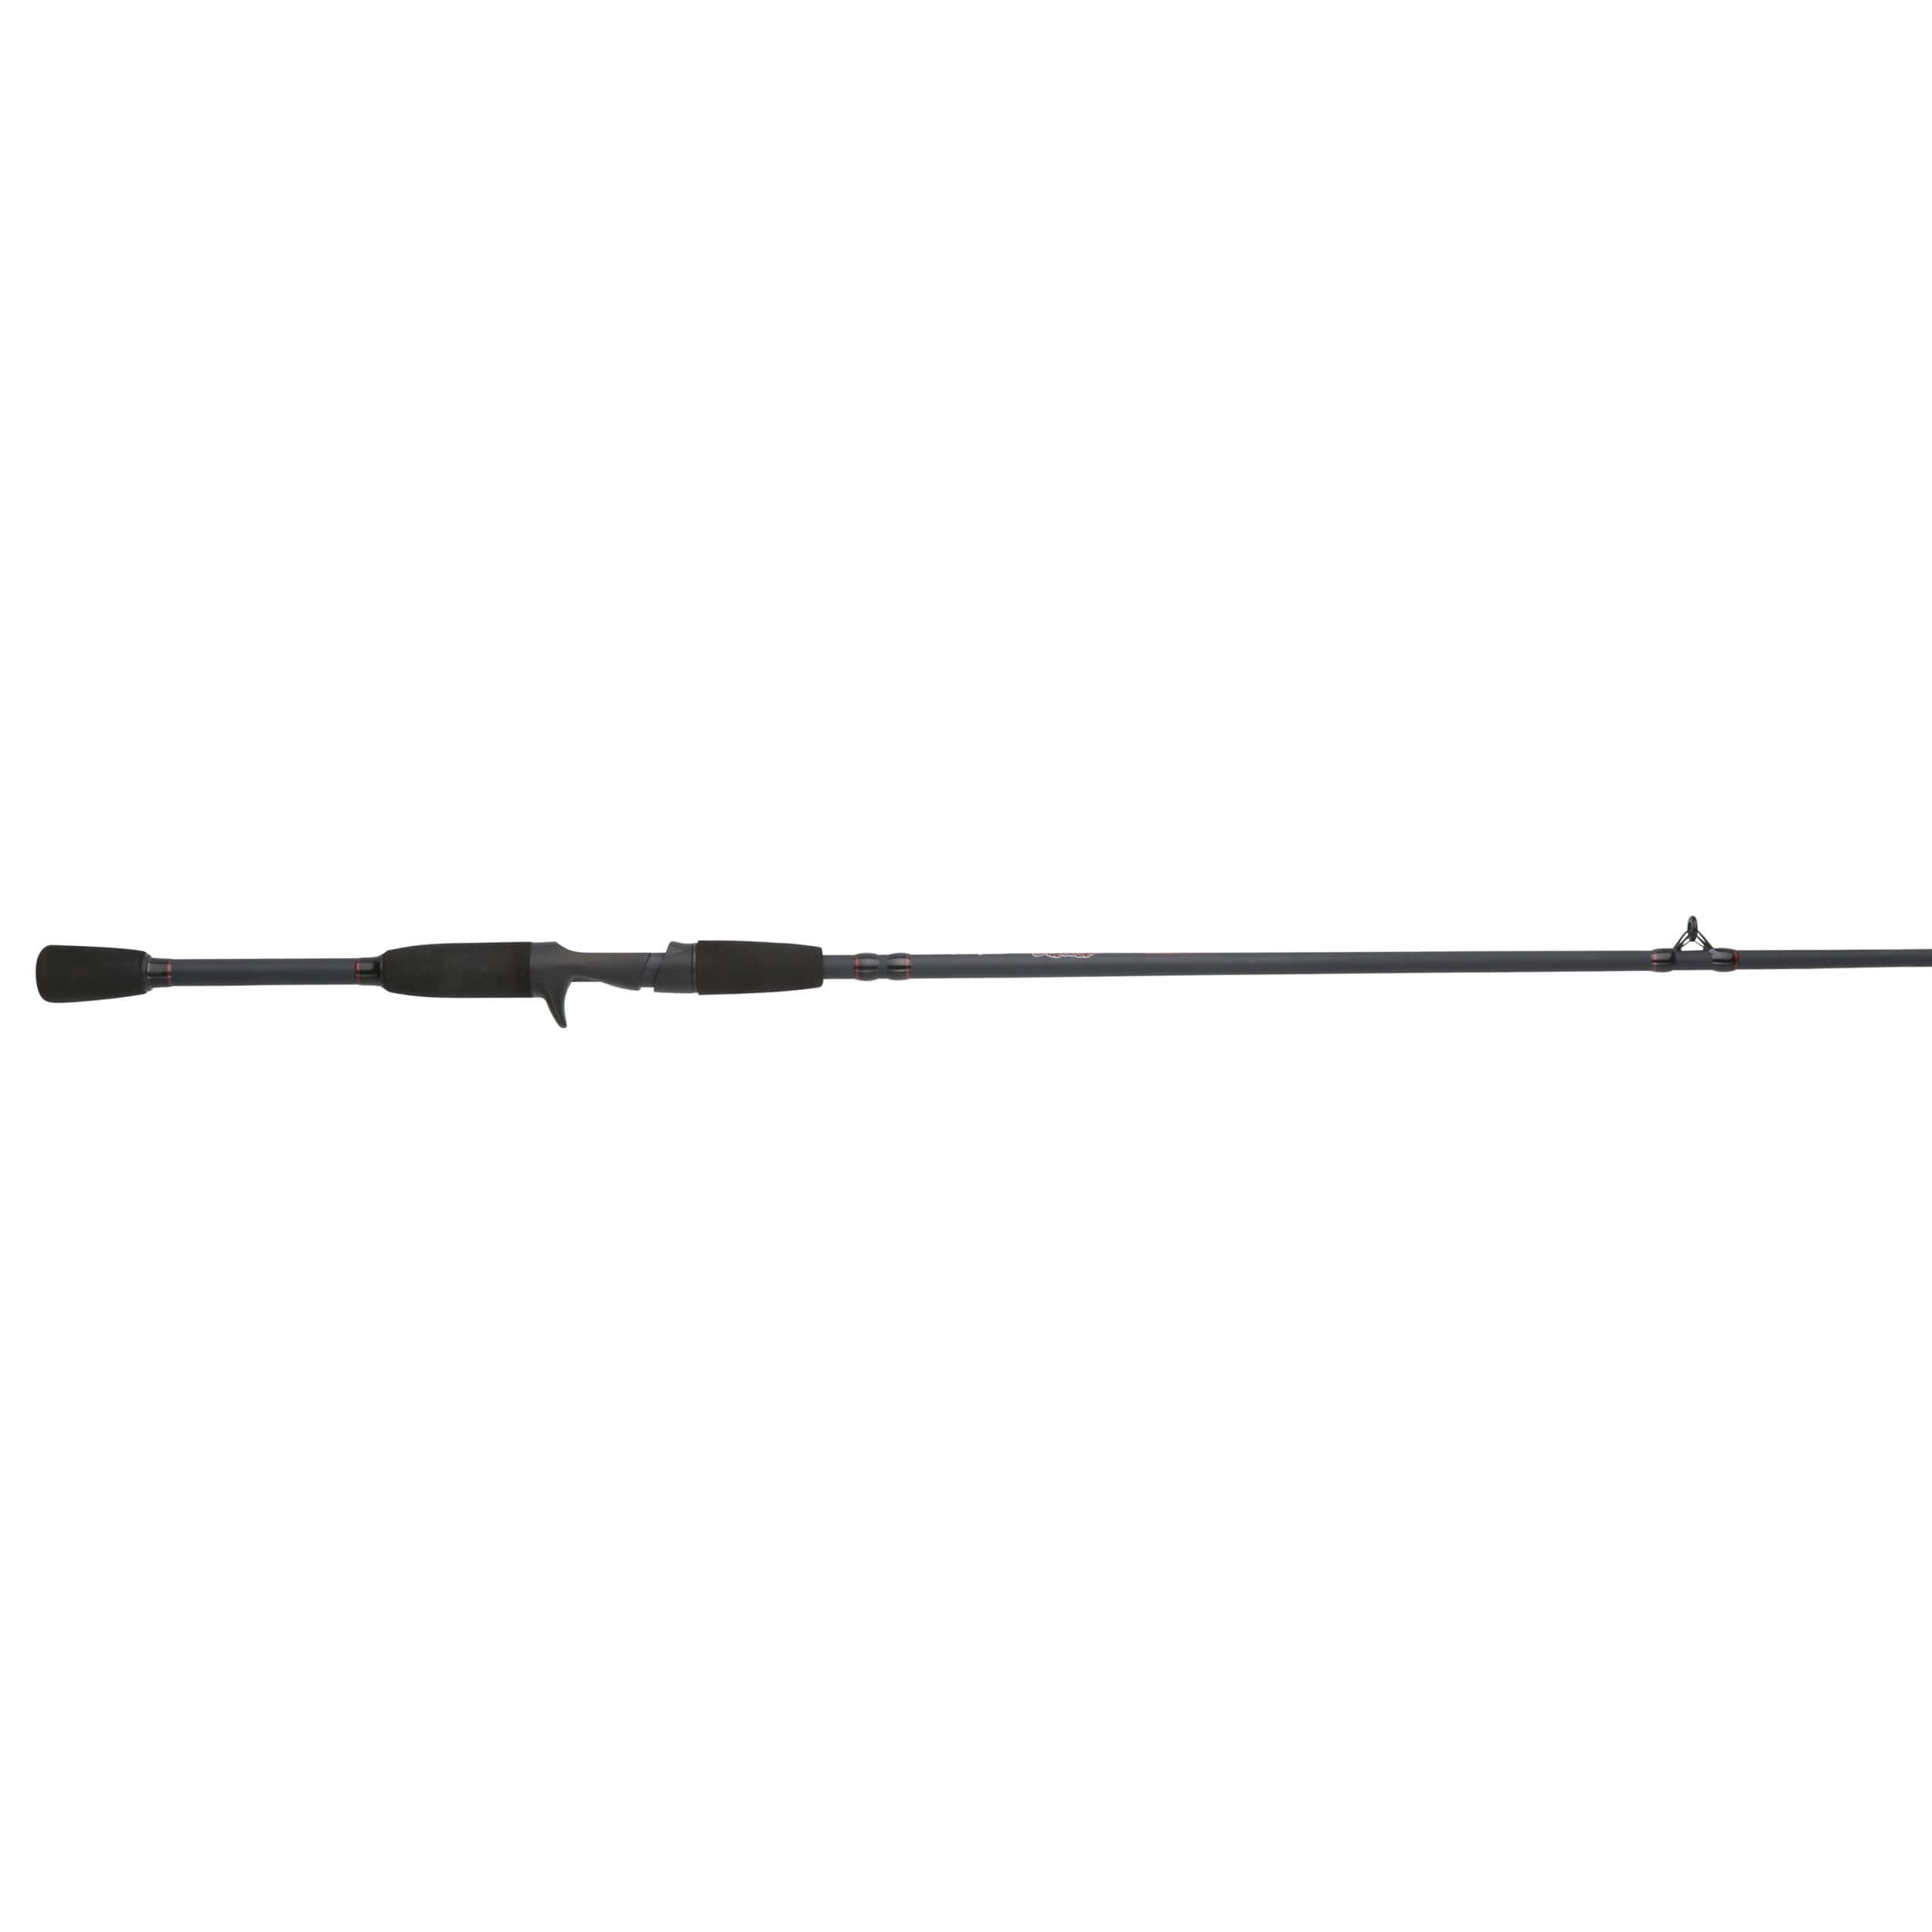 https://media-www.canadiantire.ca/product/playing/fishing/fishing-equipment/0777438/shakespeare-outcast-casting-rod-6--d8e5a8d5-cf40-4839-8155-eb39c2e91e8c-jpgrendition.jpg